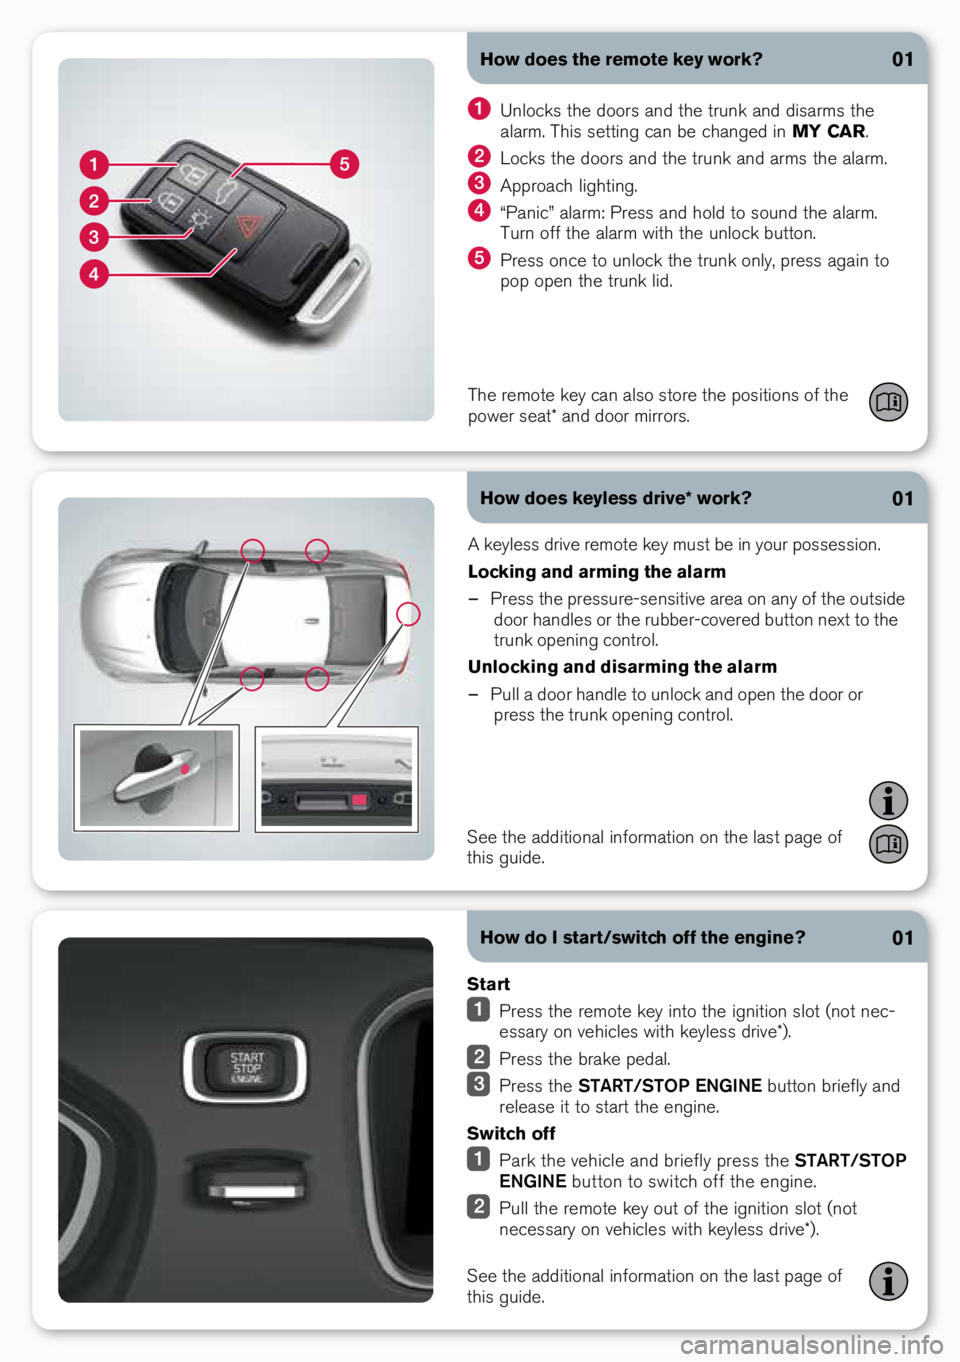 VOLVO S60 CROSS COUNTRY 2018  Quick Guide How does the remote key work?
How does keyless drive* work?01
01
A keyless drive remote key must be i\b your possessio\b.
Locking and arming the alarm 
– Press the pressure-se\bsitive \oarea o\b a\b